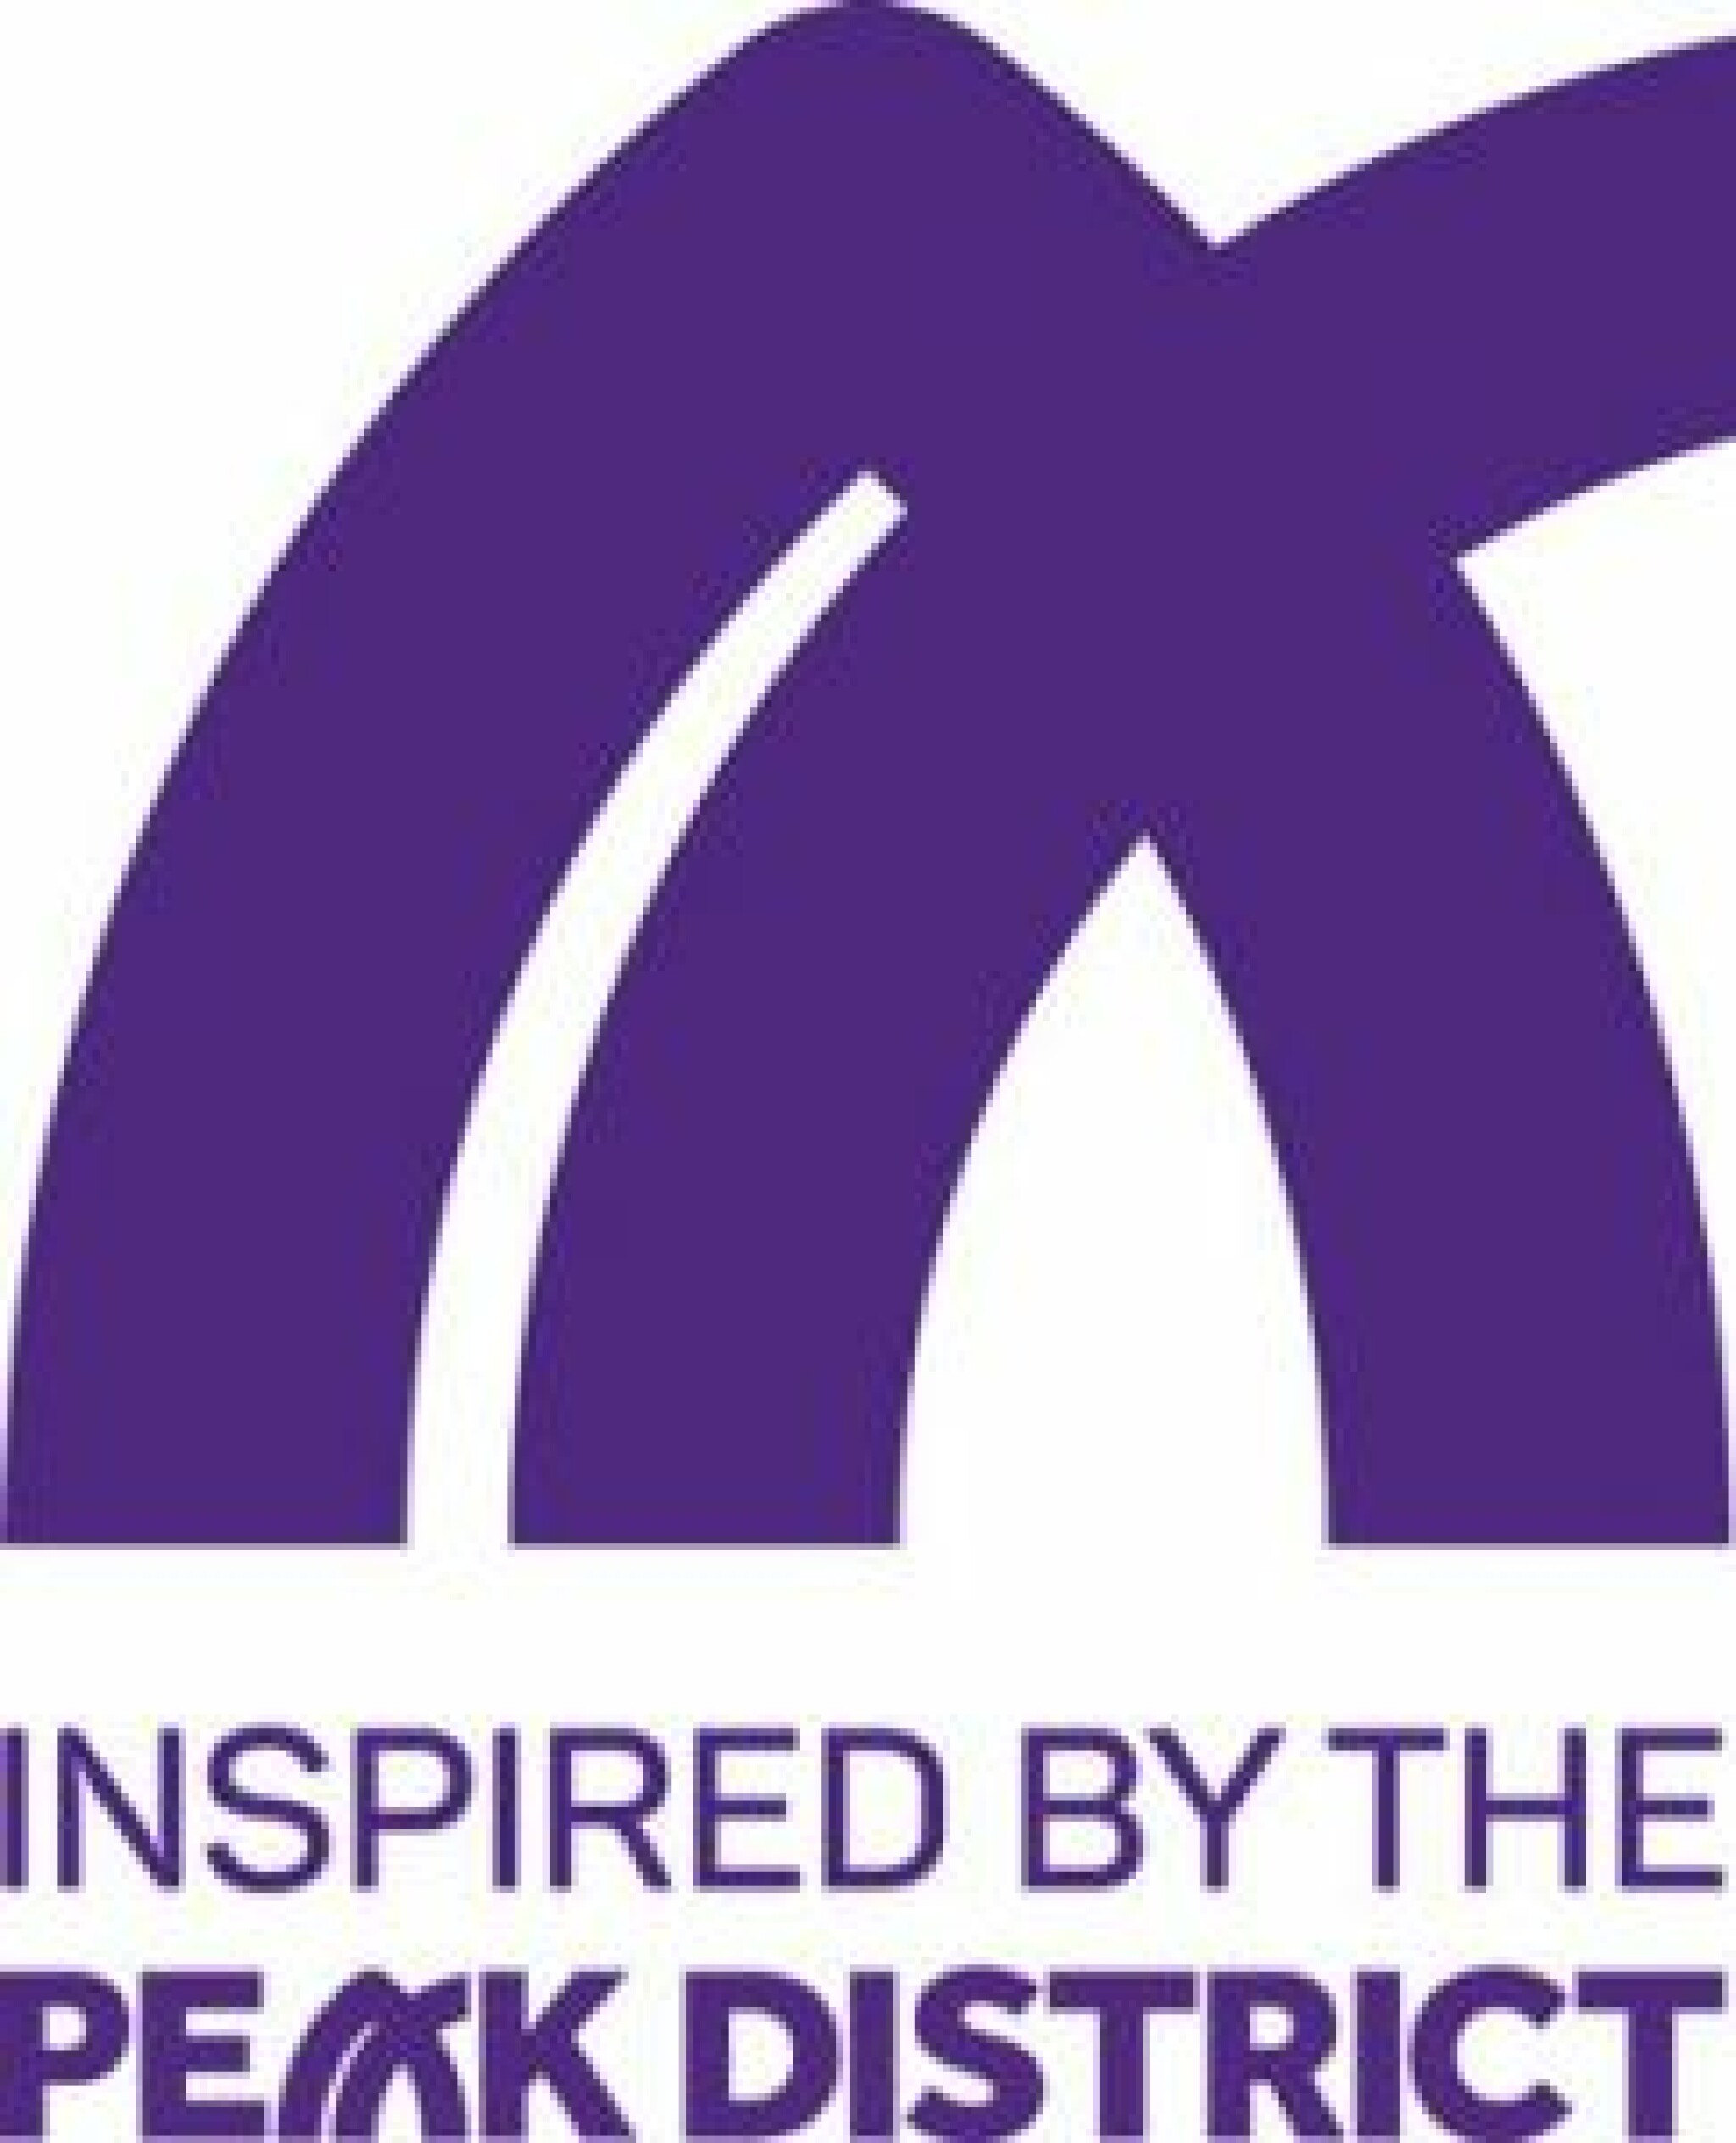 inspired-by-the-peak-district-logo-243x300.jpg